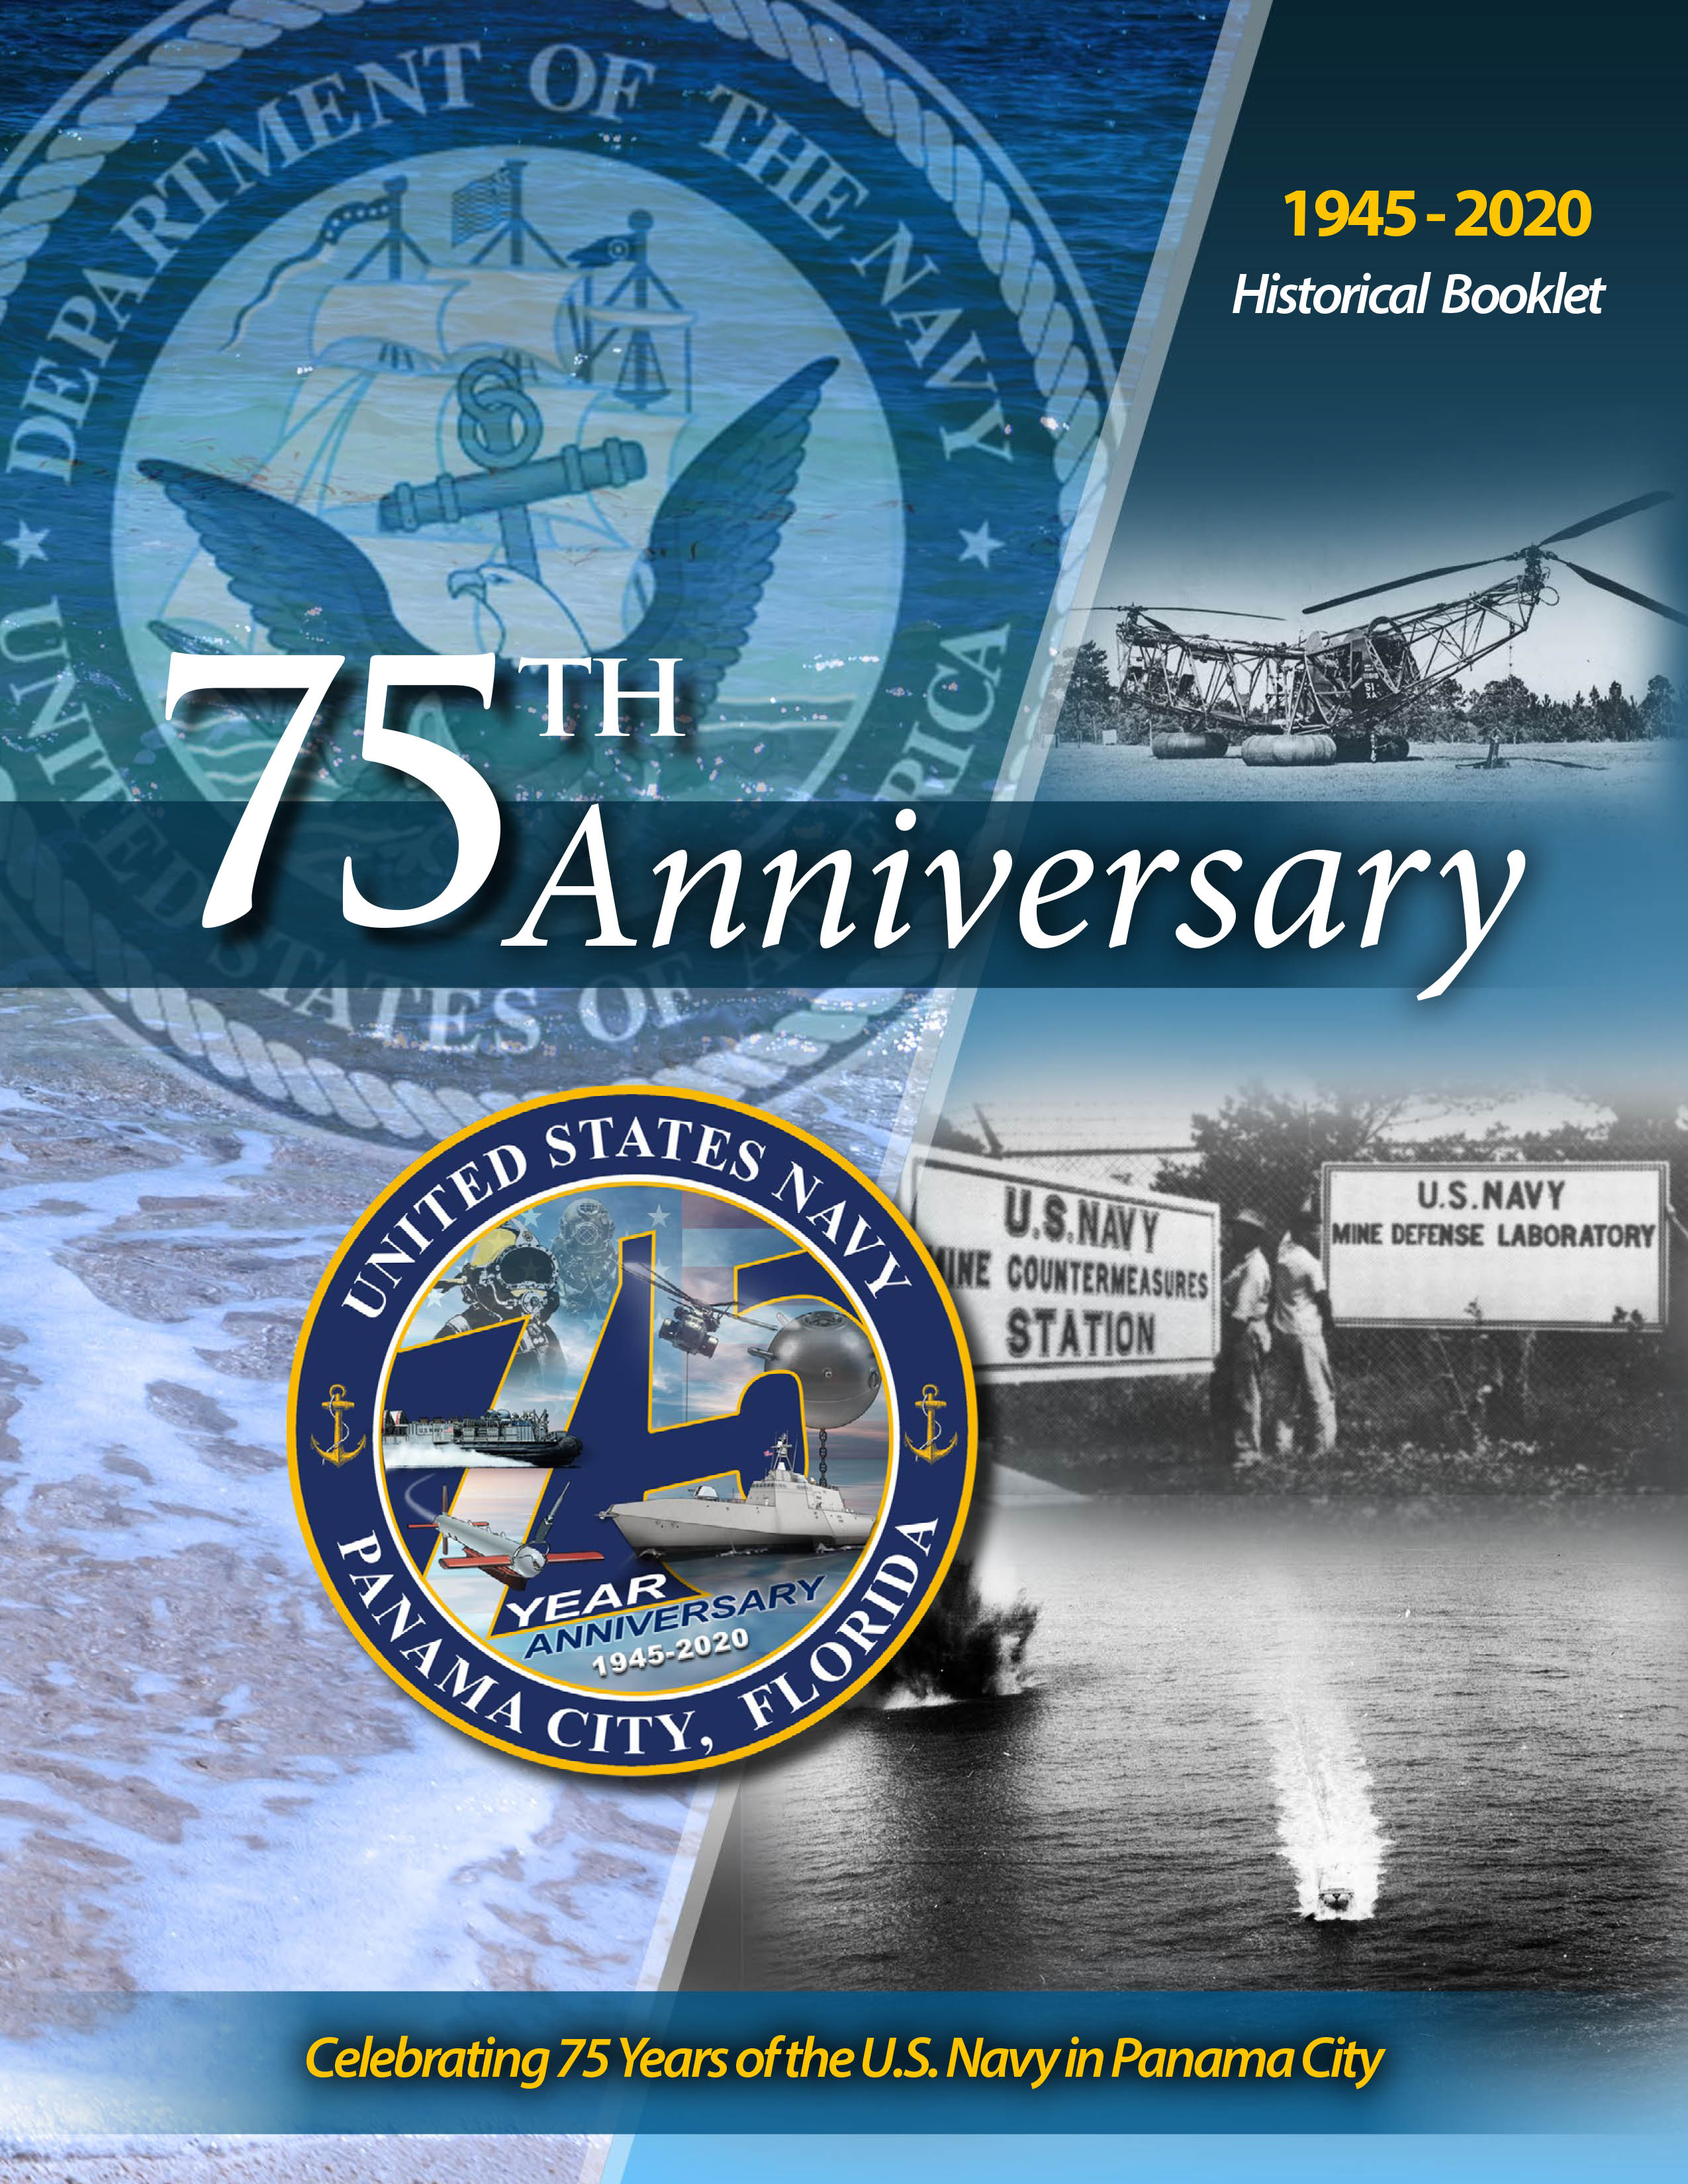 75 Anniversary Historical Booklet